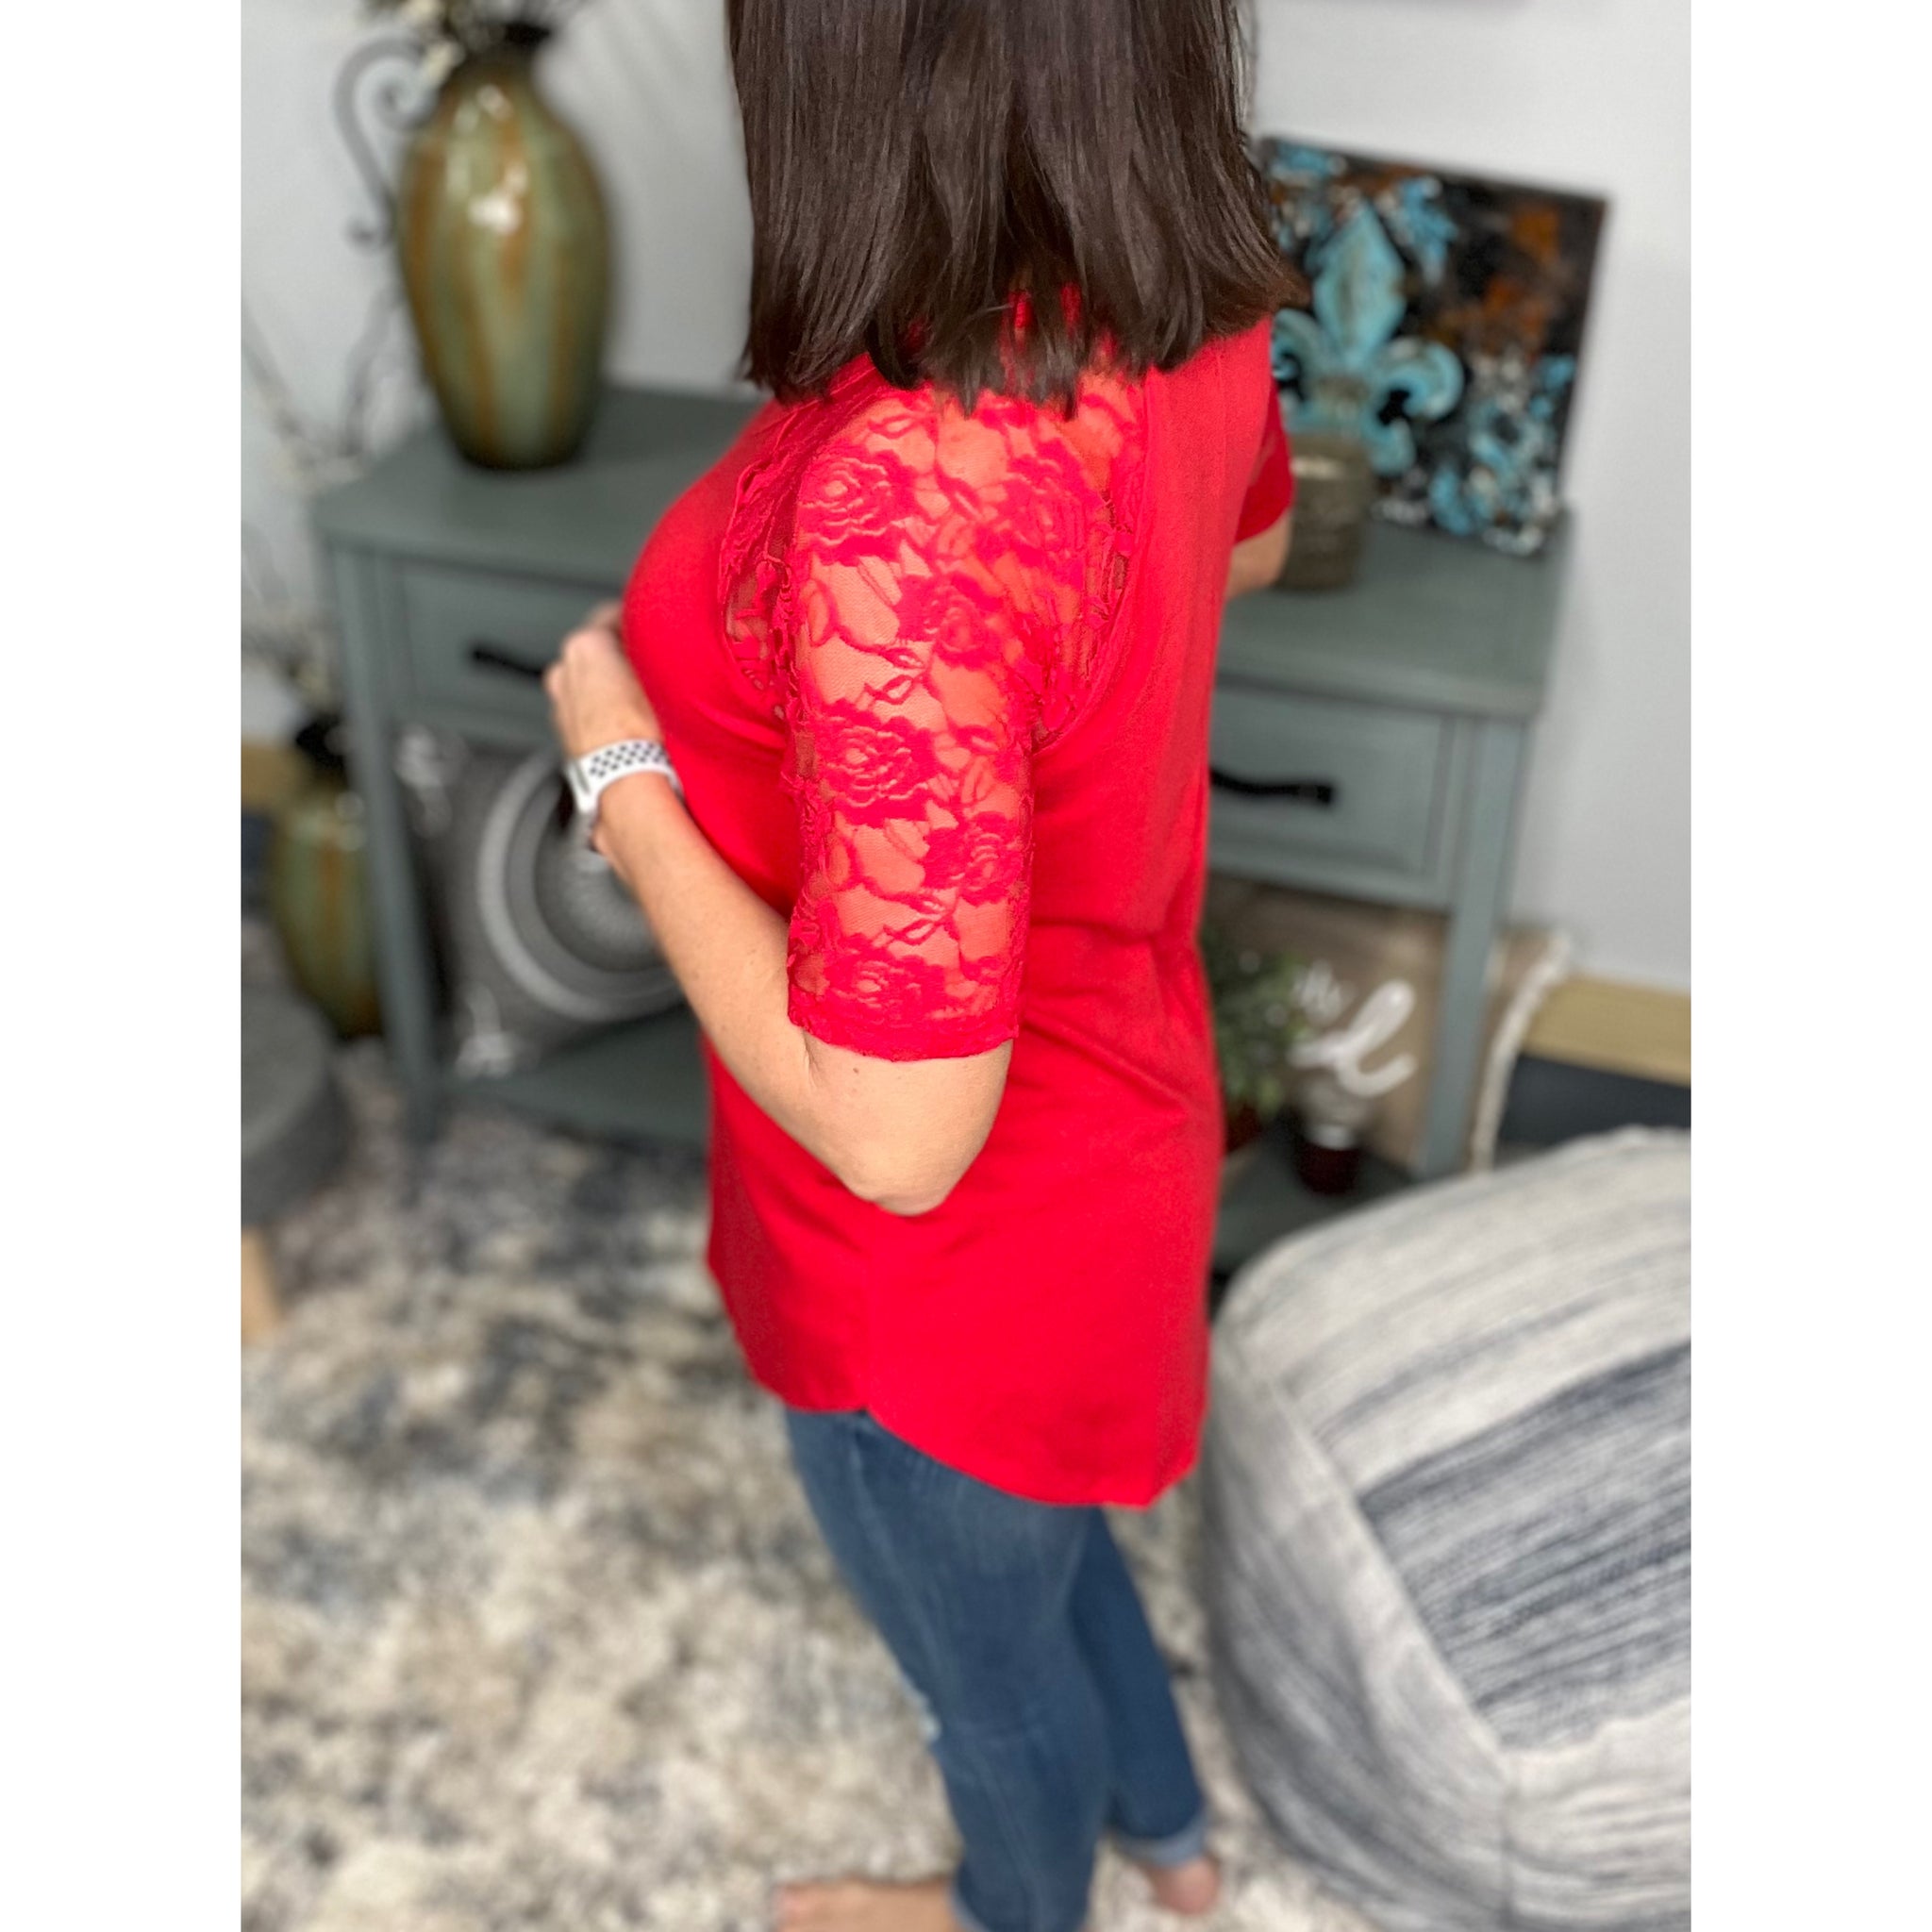 "All About The Lace" Lace Short Sleeve V Neck Rounded Bottom Dressy Floaty Girly Lipstick Red